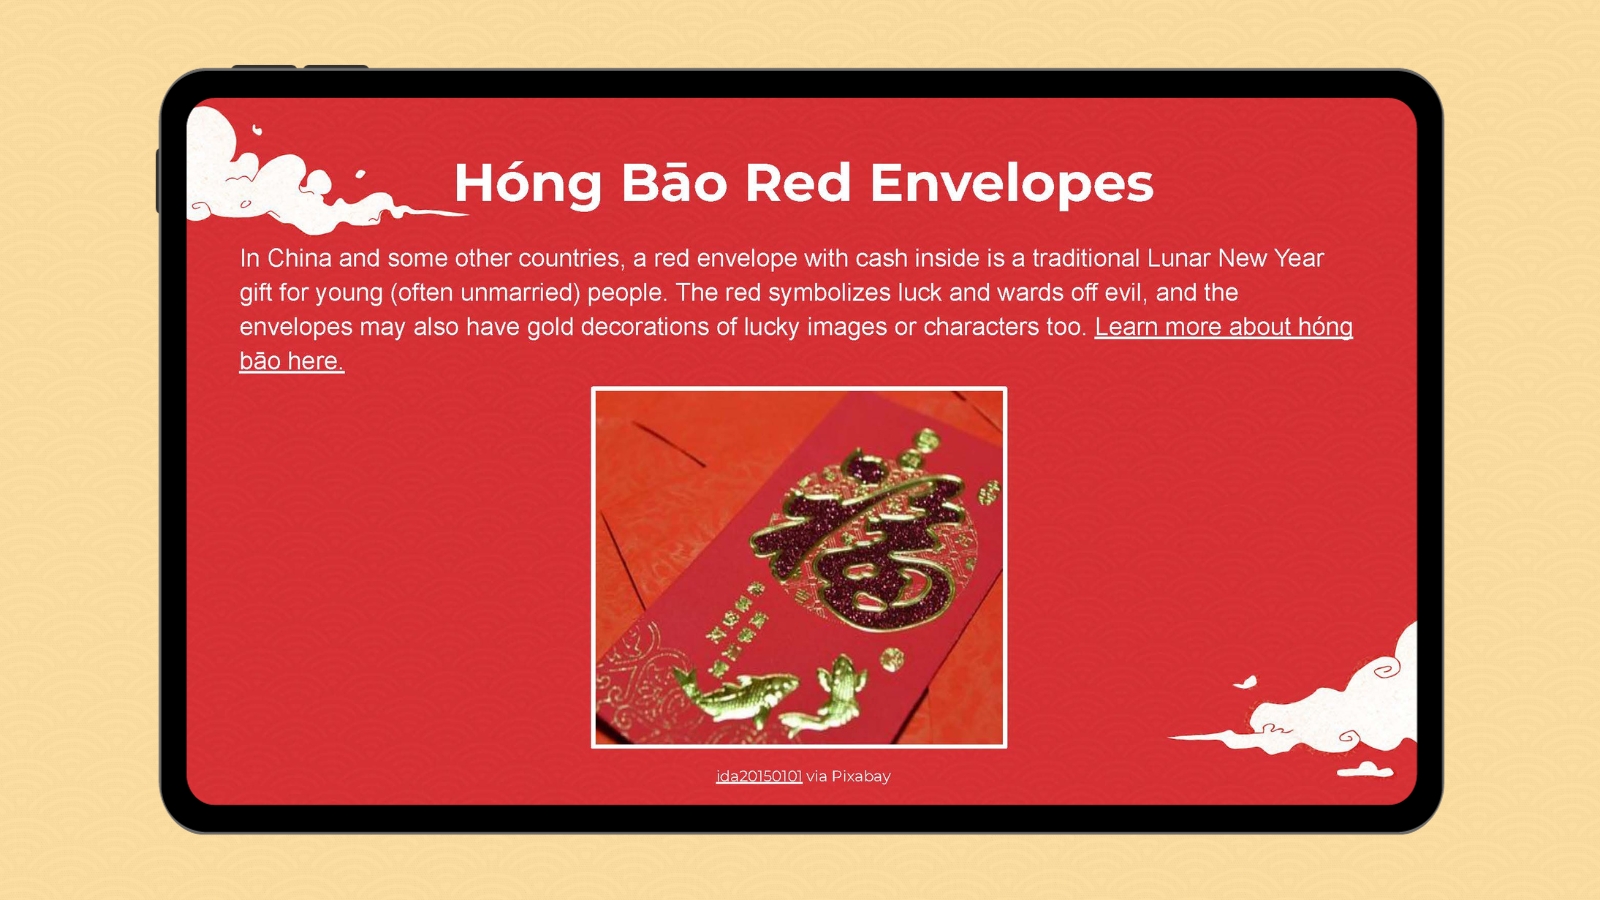 Google slide with image and information about the Lunar New Year Hong Bao Red Envelopes tradition